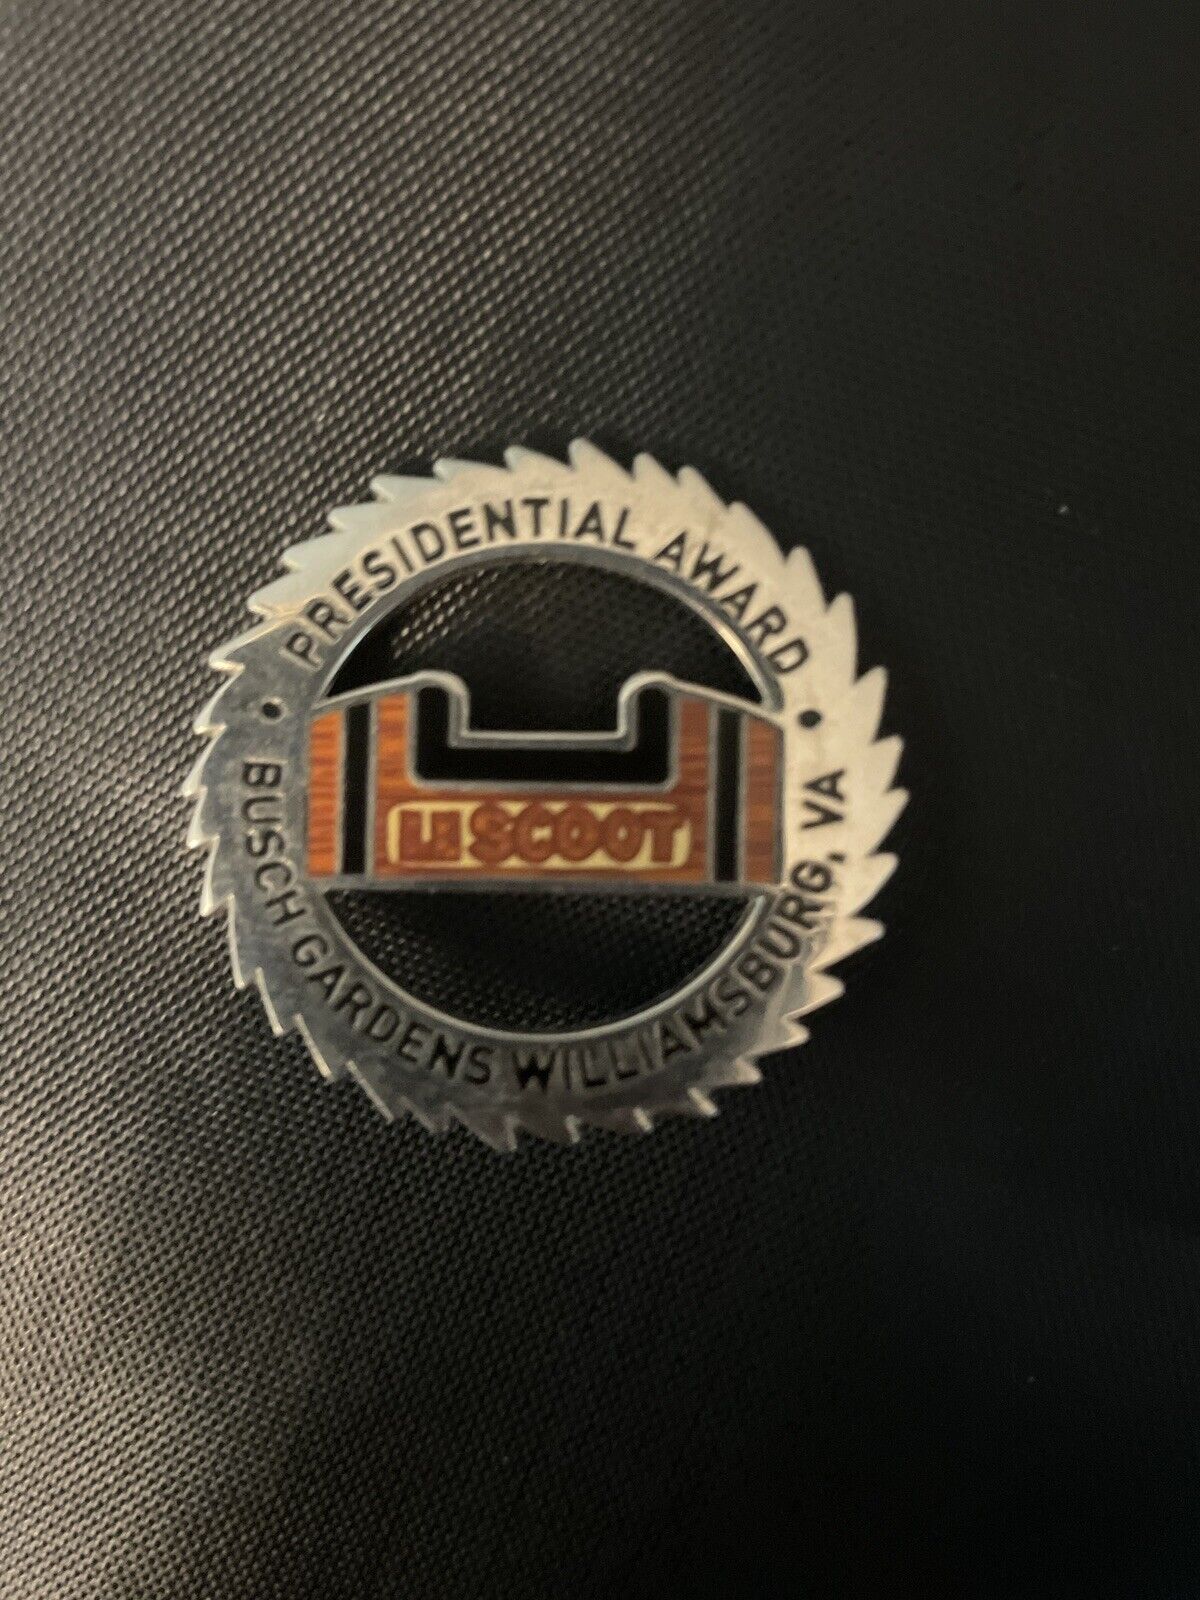 Busch Gardens Williamsburg Le Scoot Presidential Pin (missing one backing)